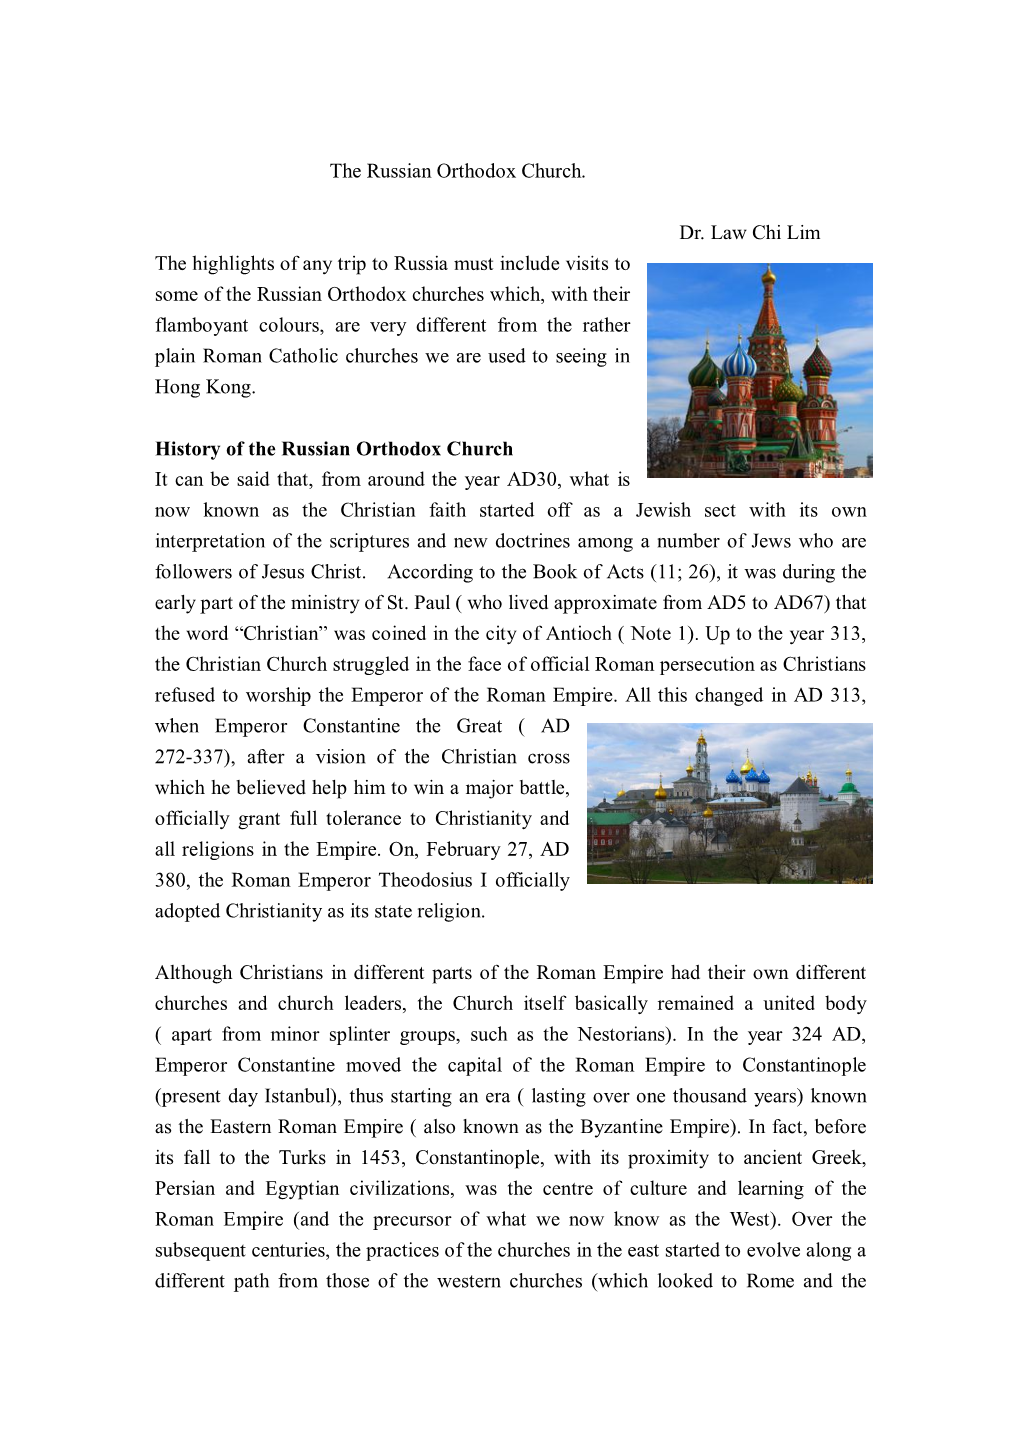 The Russian Orthodox Church. Dr. Law Chi Lim the Highlights of Any